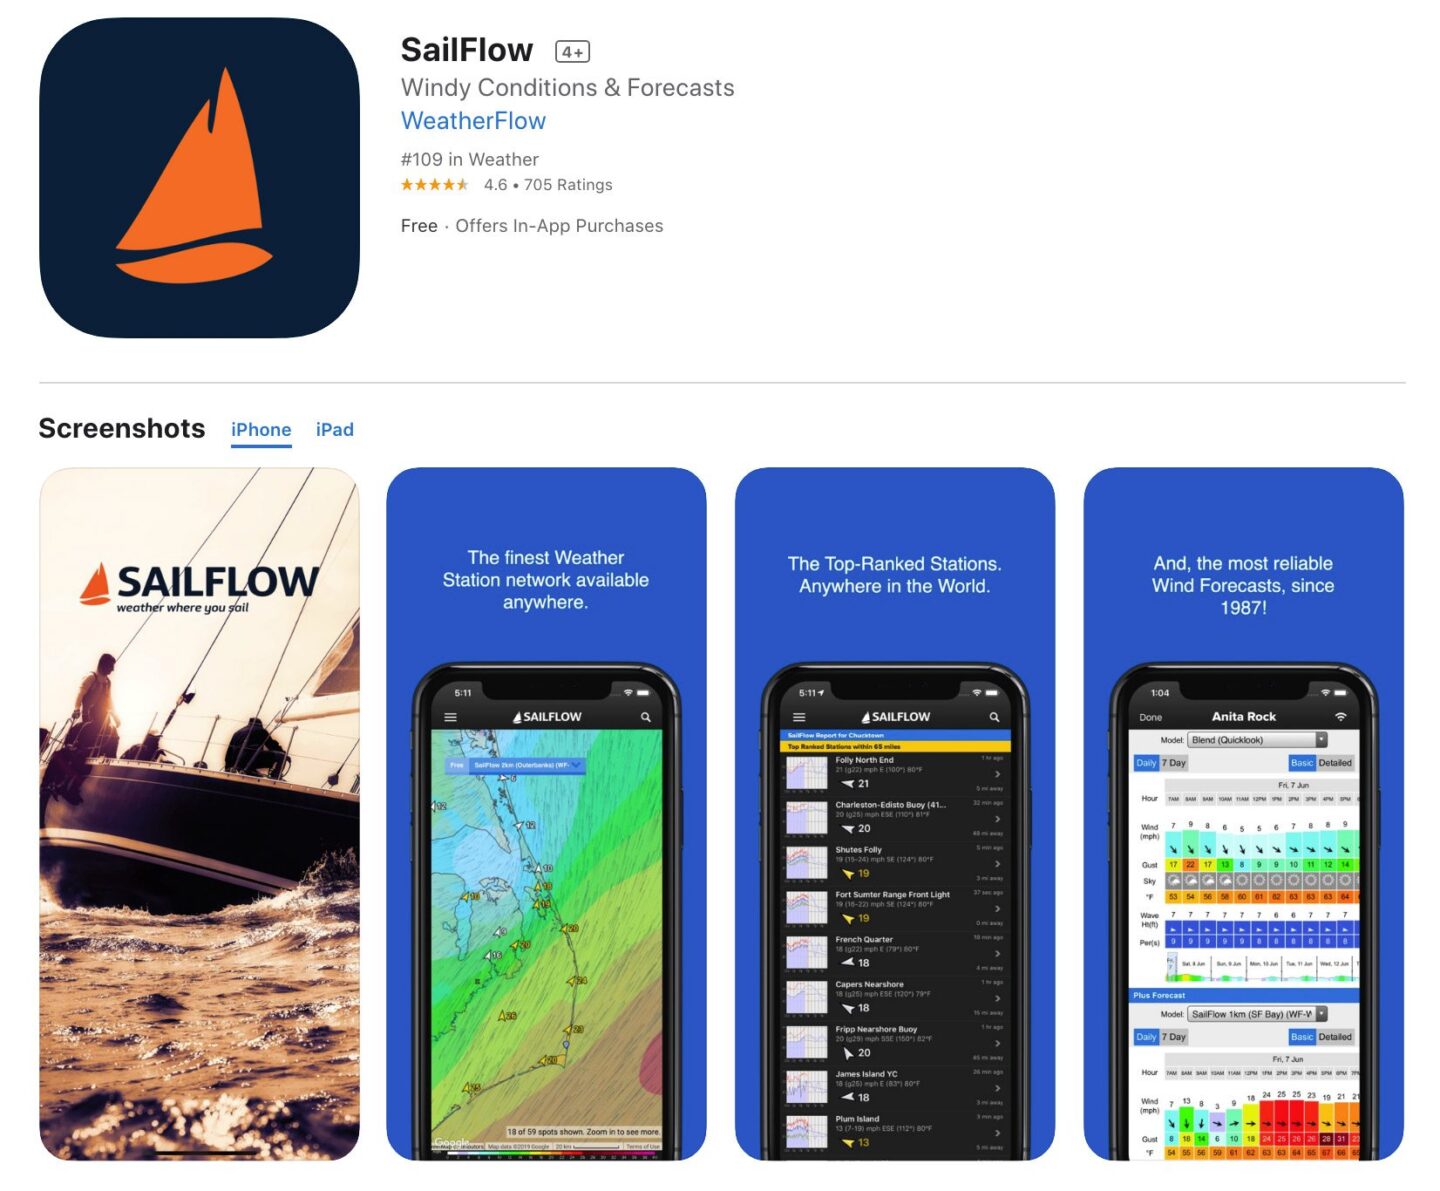 Screenshot of the SailFlow app from the iOS app store.